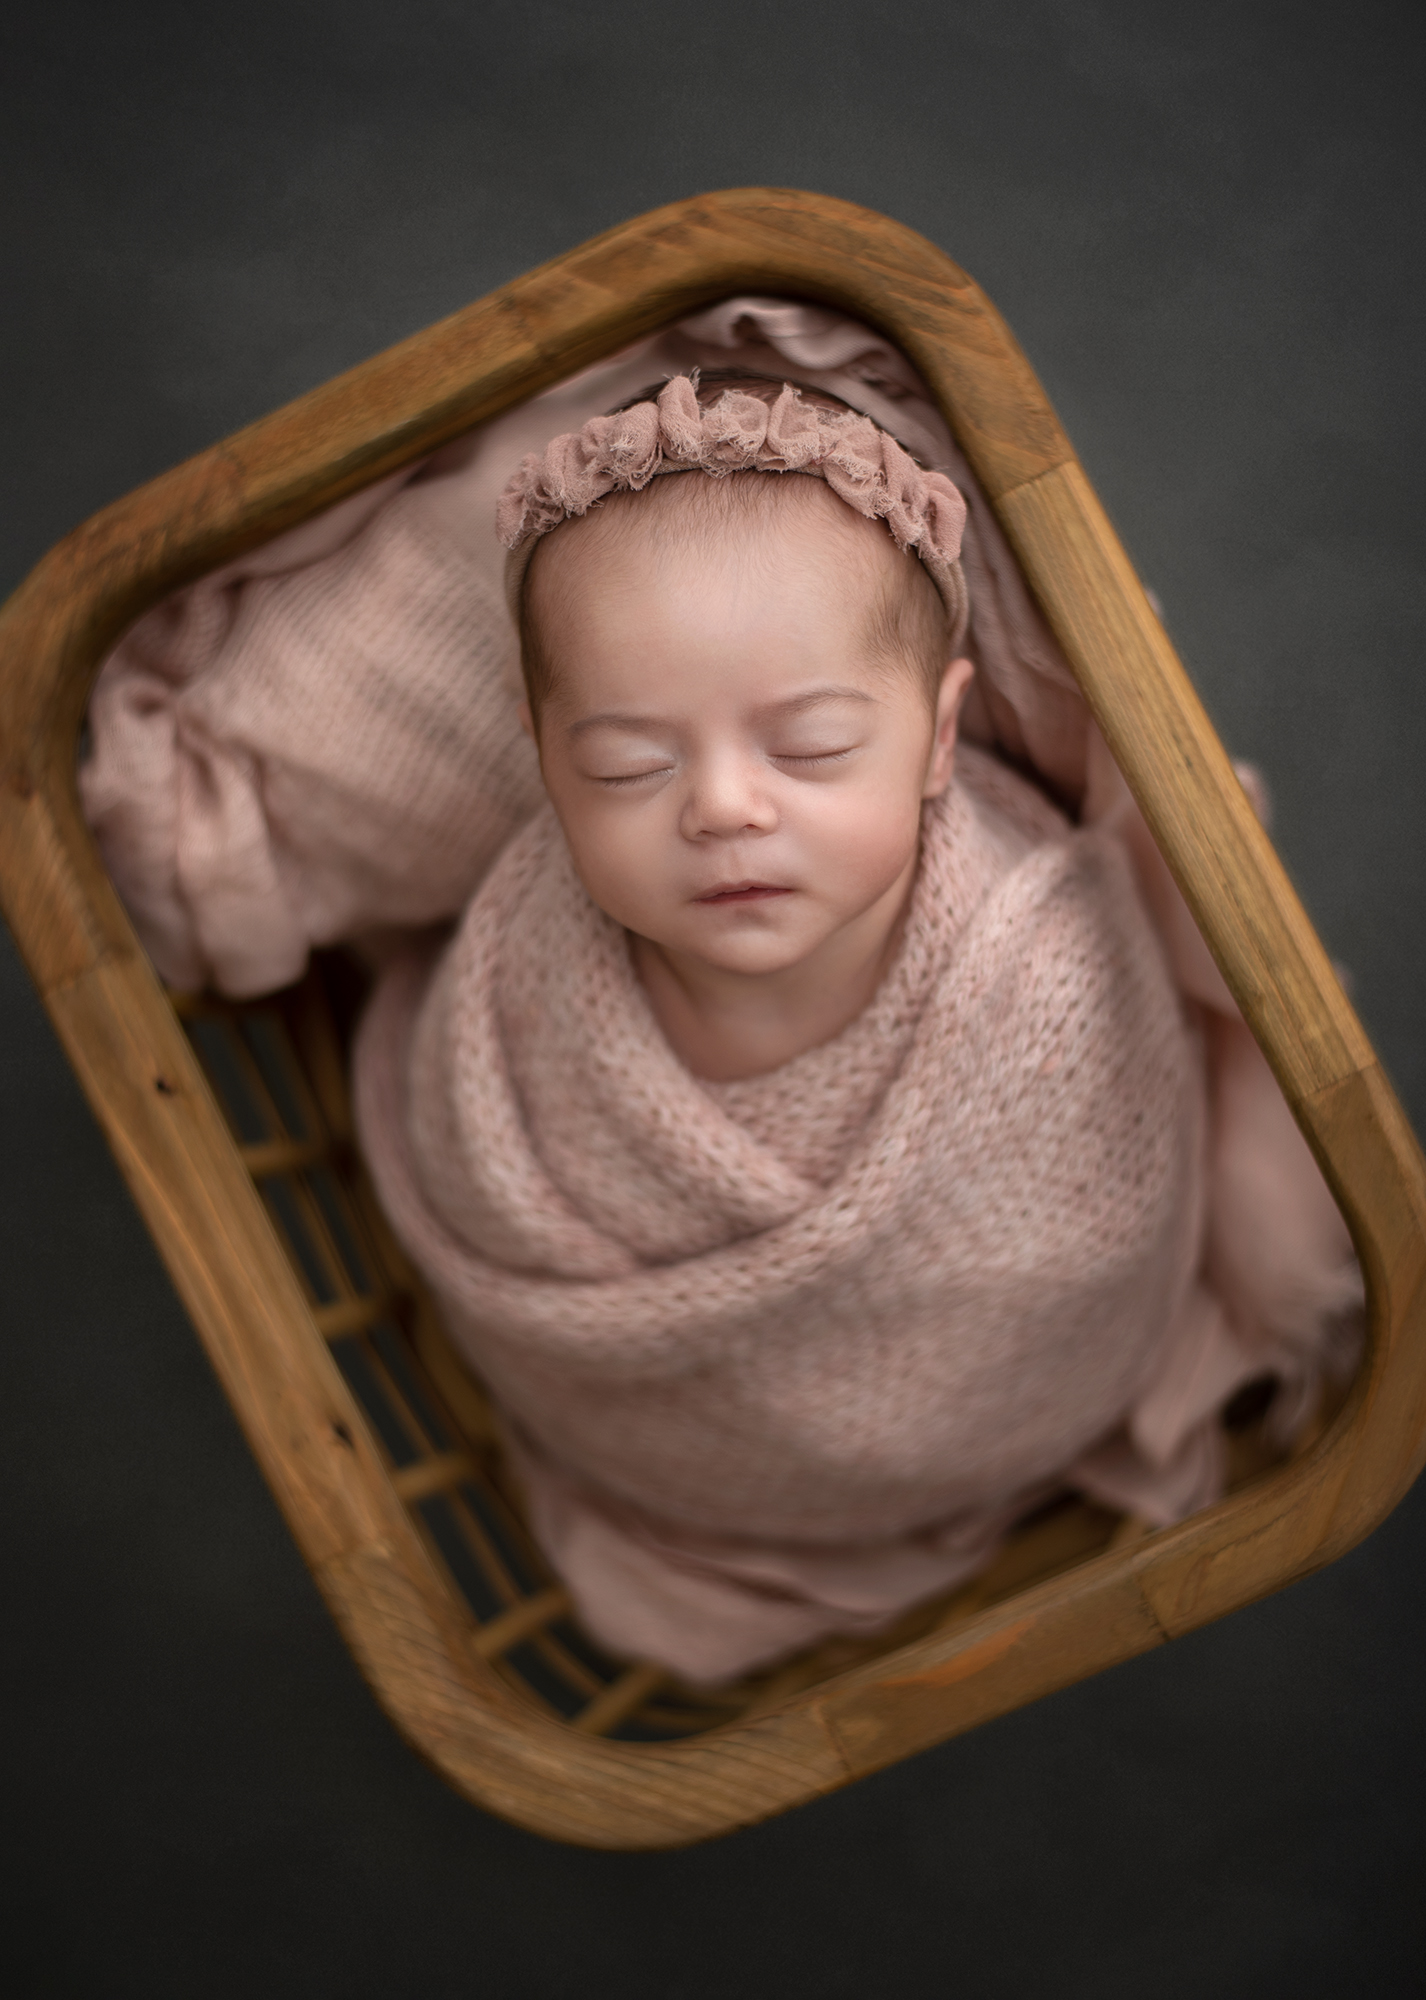 A newborn baby sleeps while swaddled in a pink knit blanket in a wooden basket